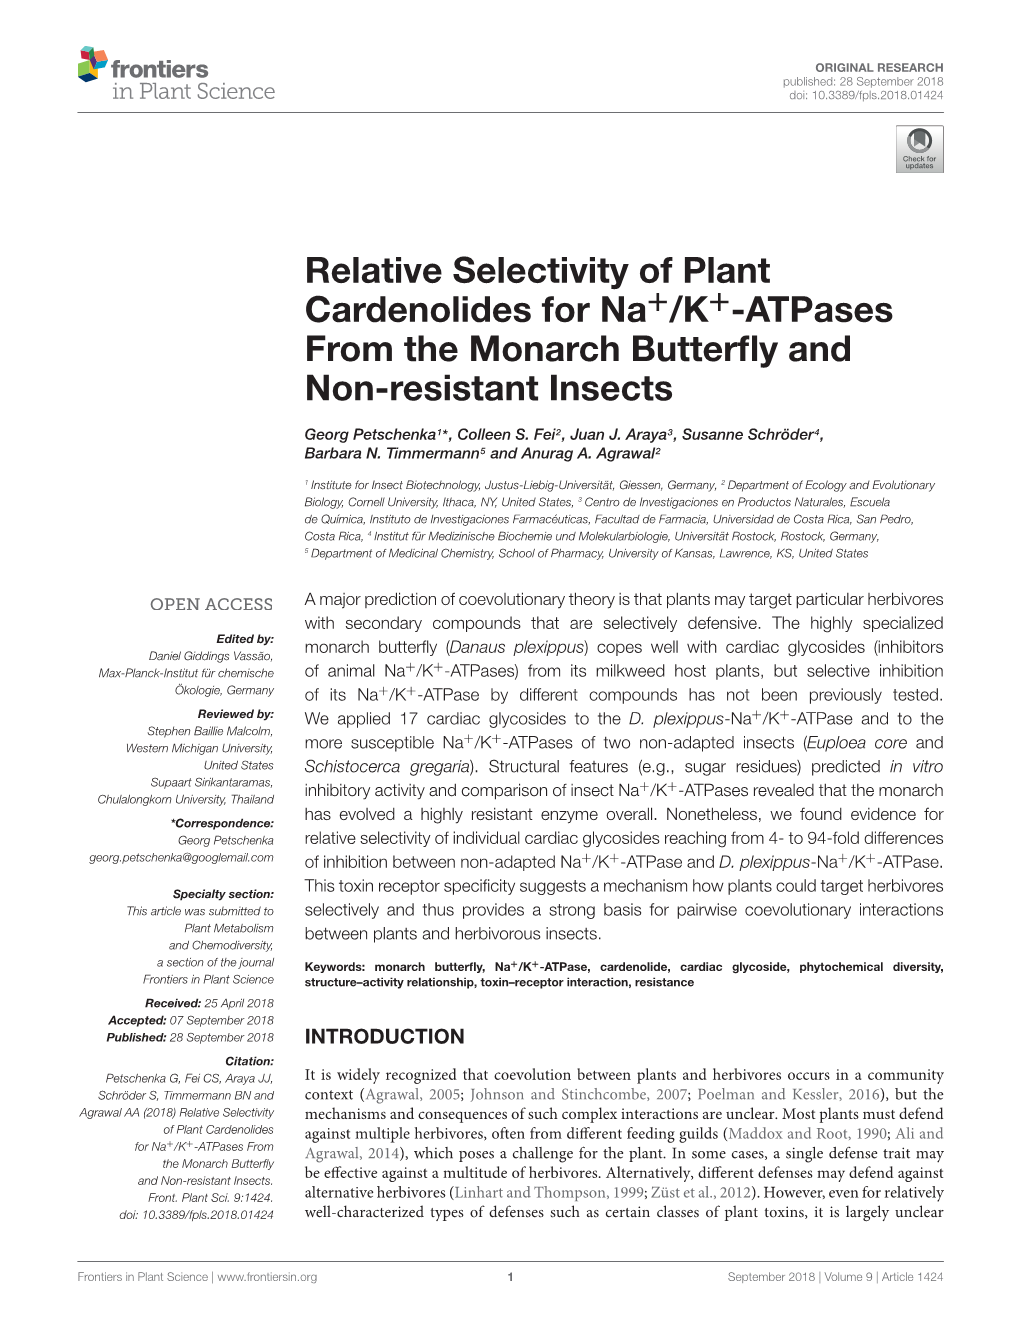 Relative Selectivity of Plant Cardenolides for Na+/K+-Atpases from the Monarch Butterﬂy and Non-Resistant Insects